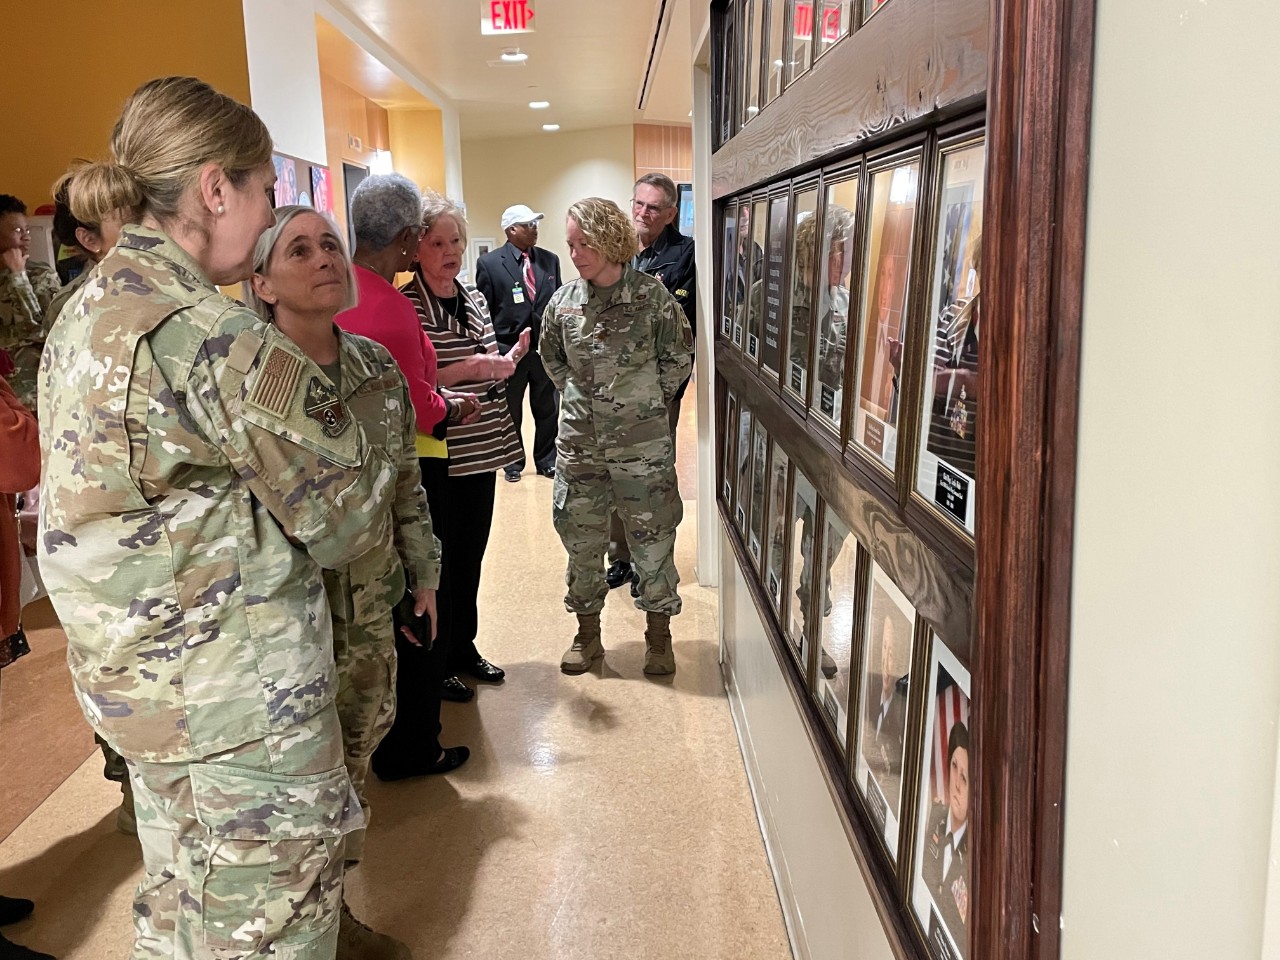 Members of the Tennessee National Guard check out the new Women's History Wall, March 28, at their Joint Force Headquarters, in Nashville. The wall features 23 women who paved the way by becoming the first females to achieve the respective positions in the Tennessee National Guard. (photo by Capt. Kealy Moriarty)